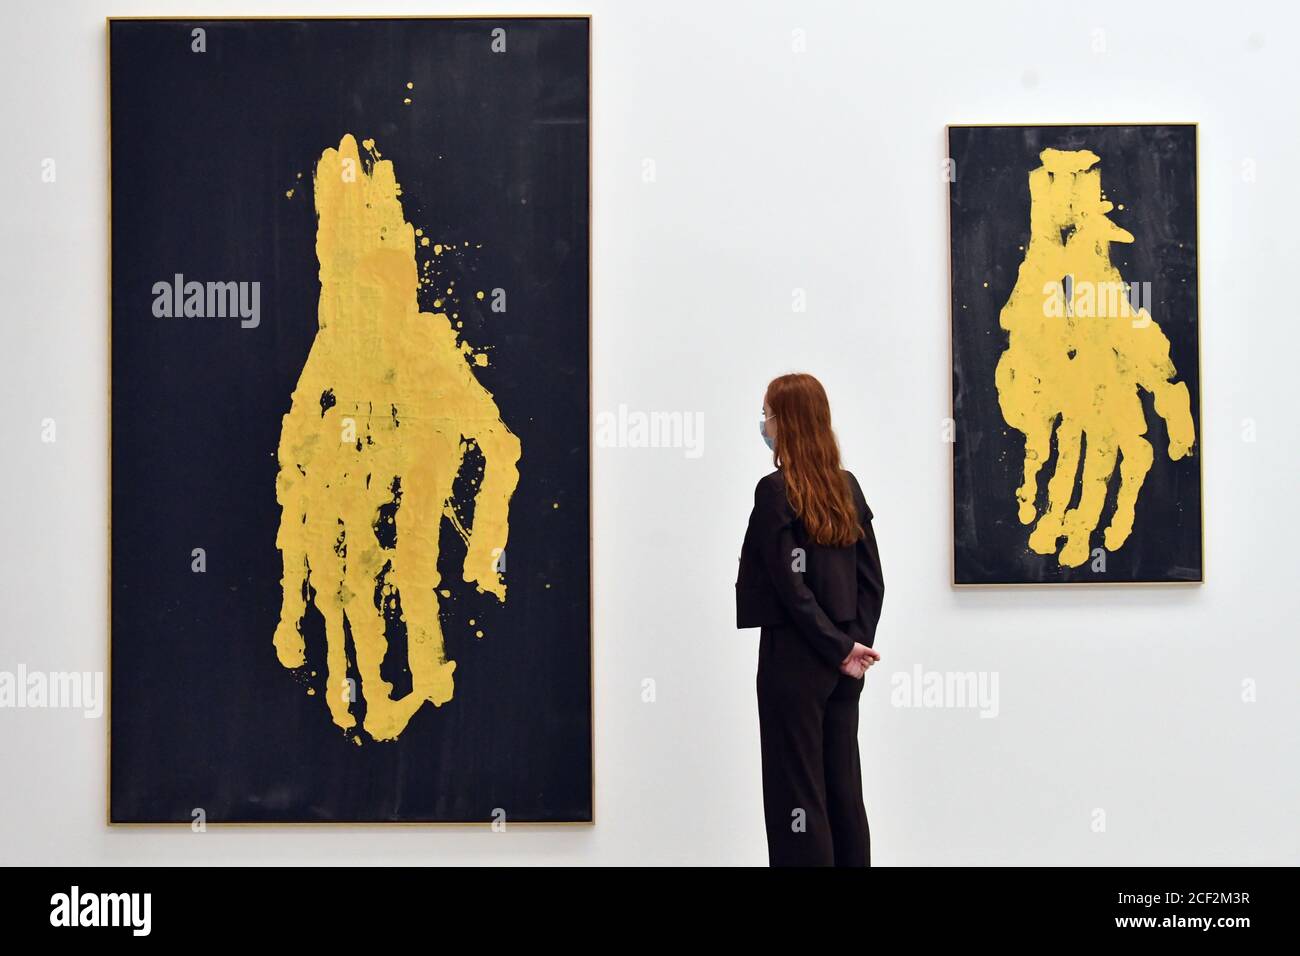 London, UK - 3 September 2020 Preview of ÔDarkness GoldnessÕ, a solo exhibition by Georg Baselitz at White Cube Mason's Yard consisting of new paintings featuring mysterious, ghostly hands rendered in gold, alongside related drawings and fire-gilded bronze reliefs, the artistÕs first sculptural works in almost a decade. (L) Mano meno, 2019, (R) Mettere mano a C anfangen, 2019Credit: Nils Jorgensen/Alamy Live News Stock Photo